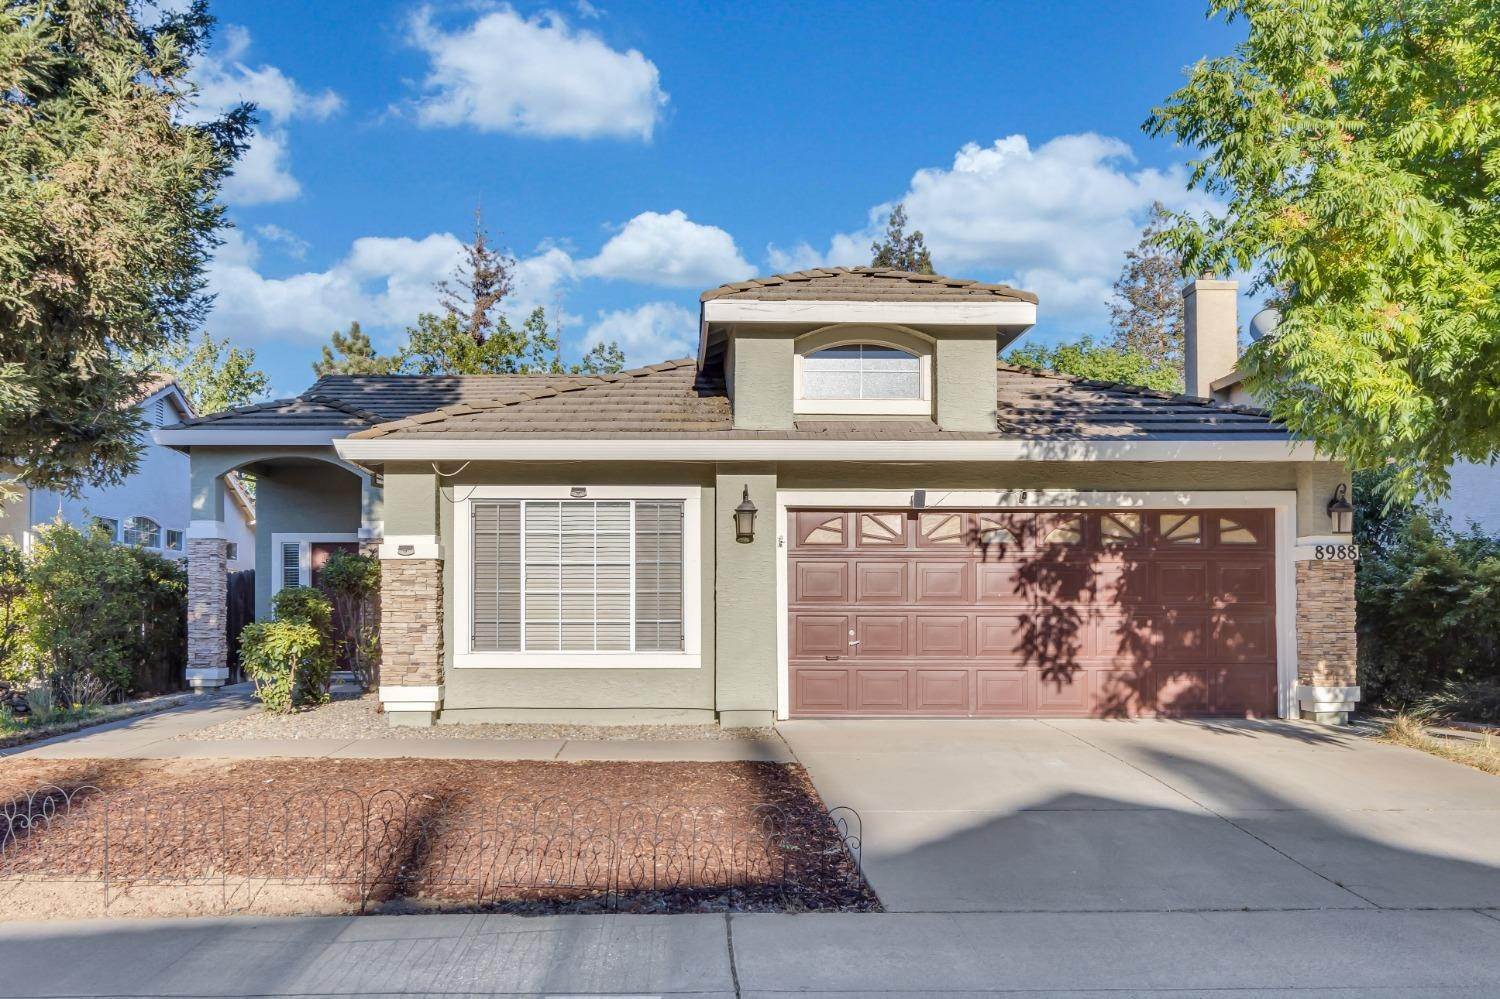 Single Family Homes for Active at 8988 Richborough Way Elk Grove, California 95624 United States